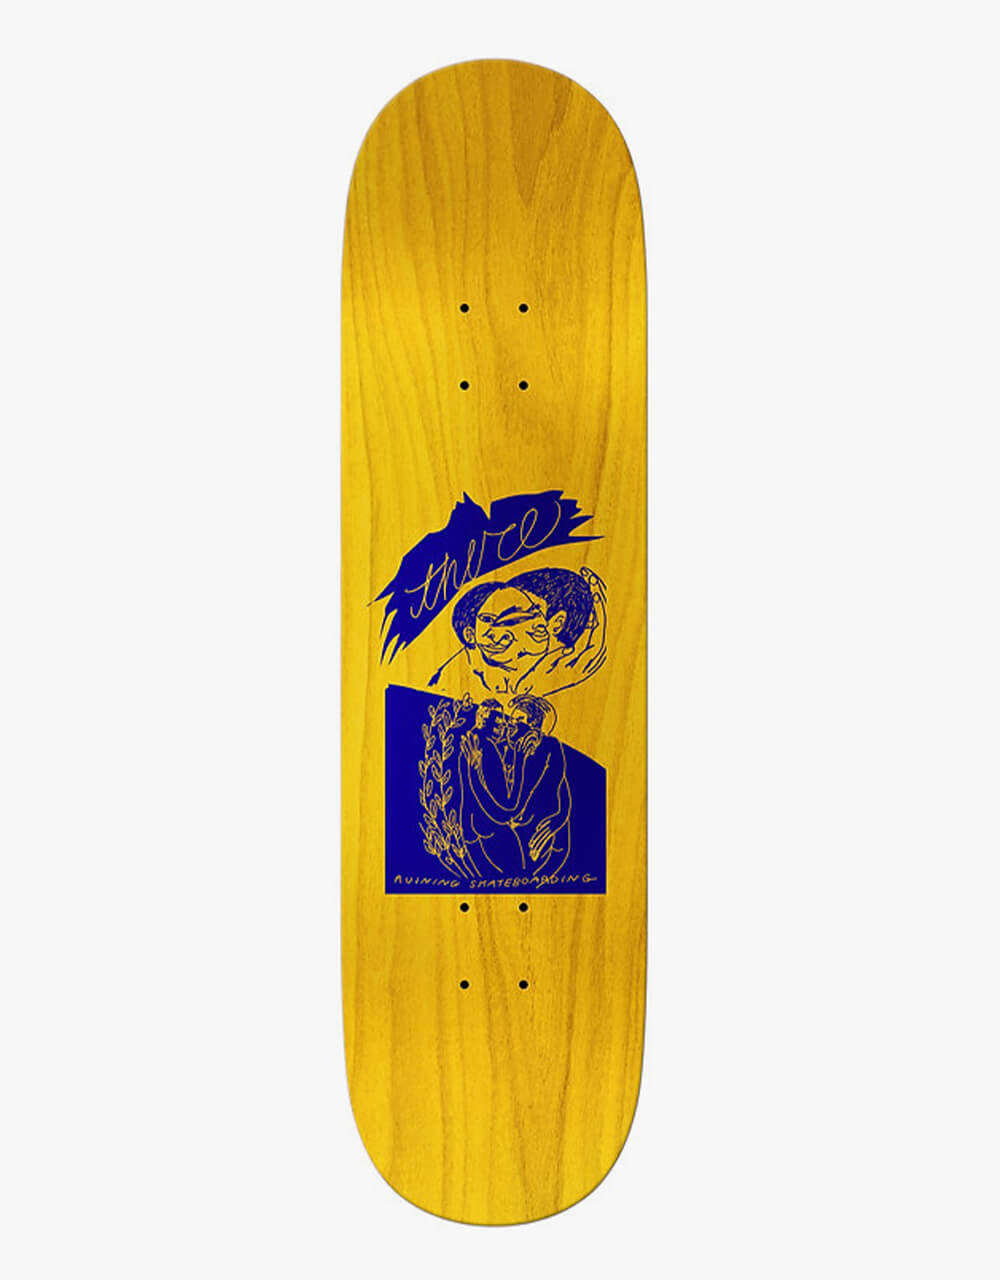 There James Apartment Skateboard Deck - 8.3"